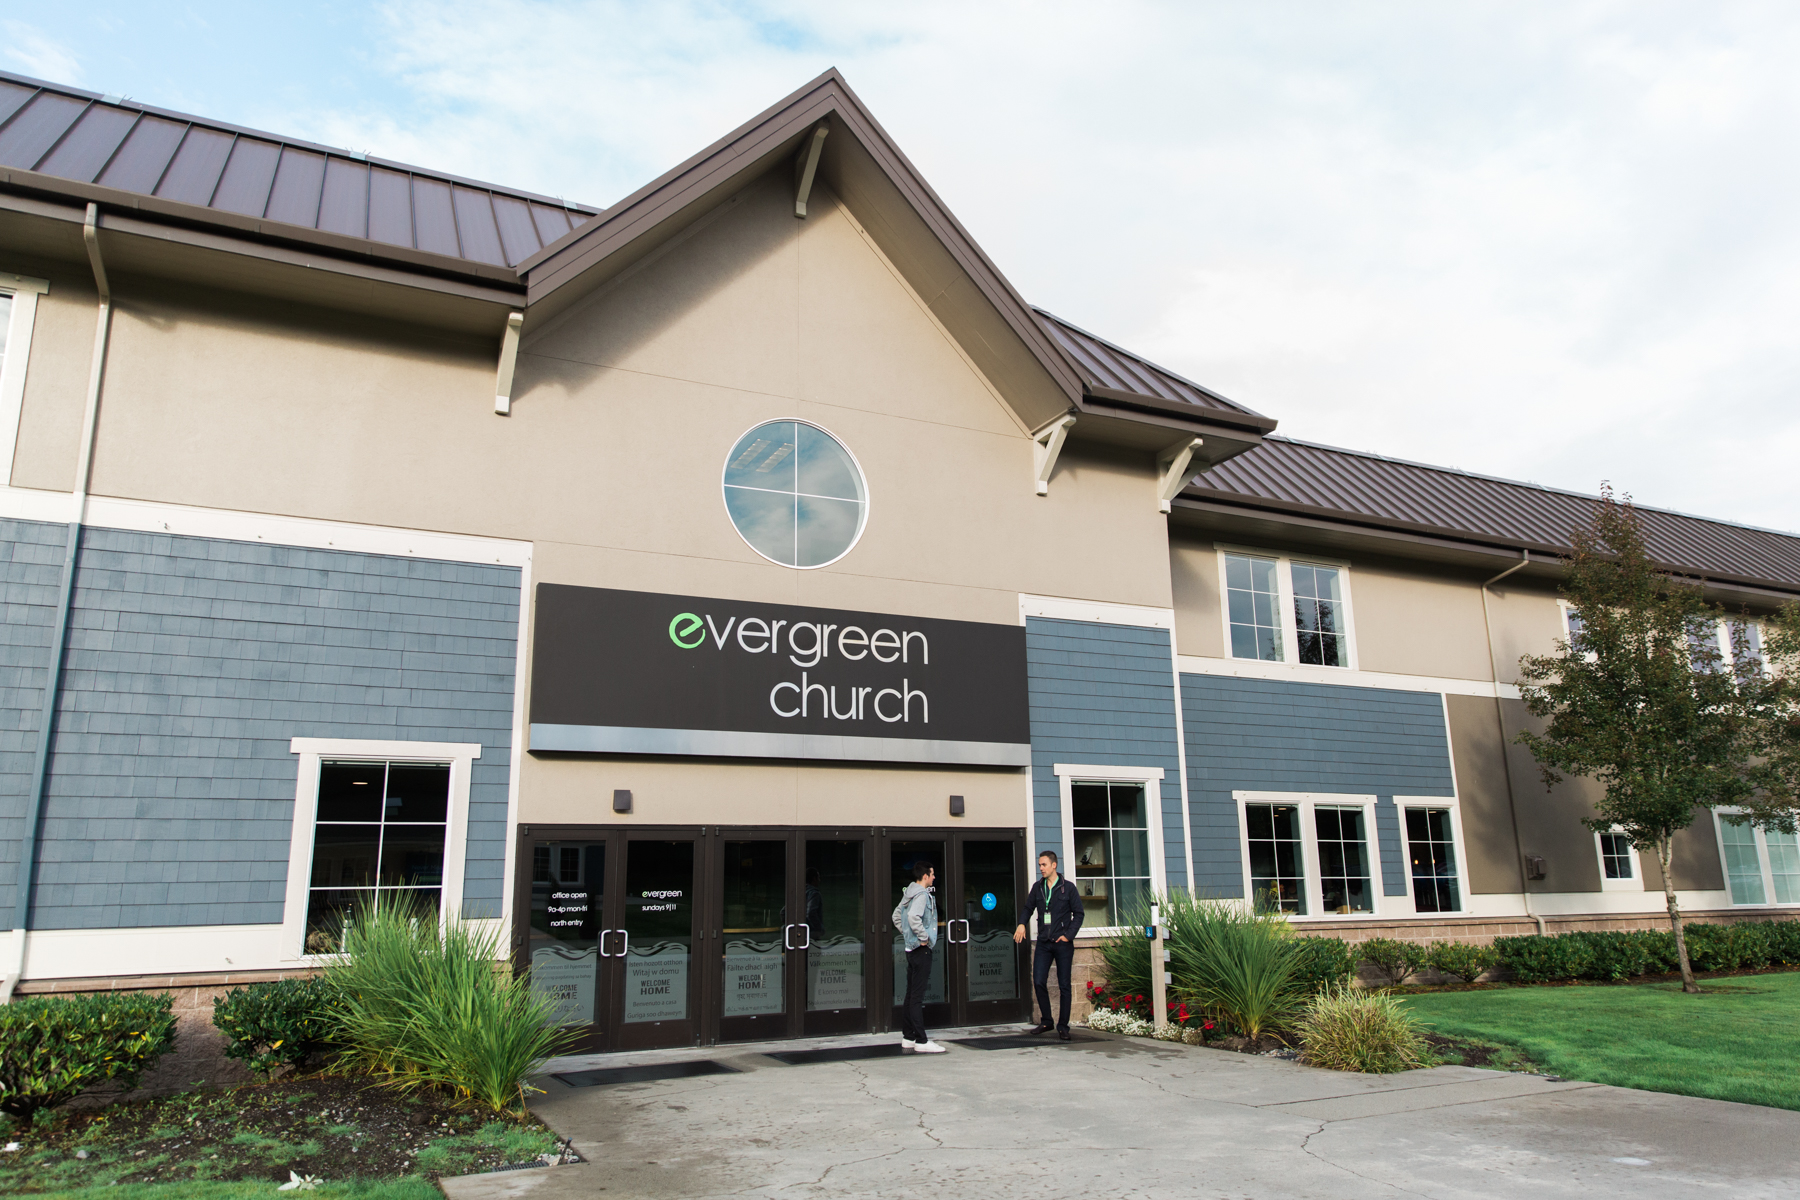  Evergreen Church is located in Bothell, WA, which is close to major companies such as Microsoft, Boeing, and Amazon. 